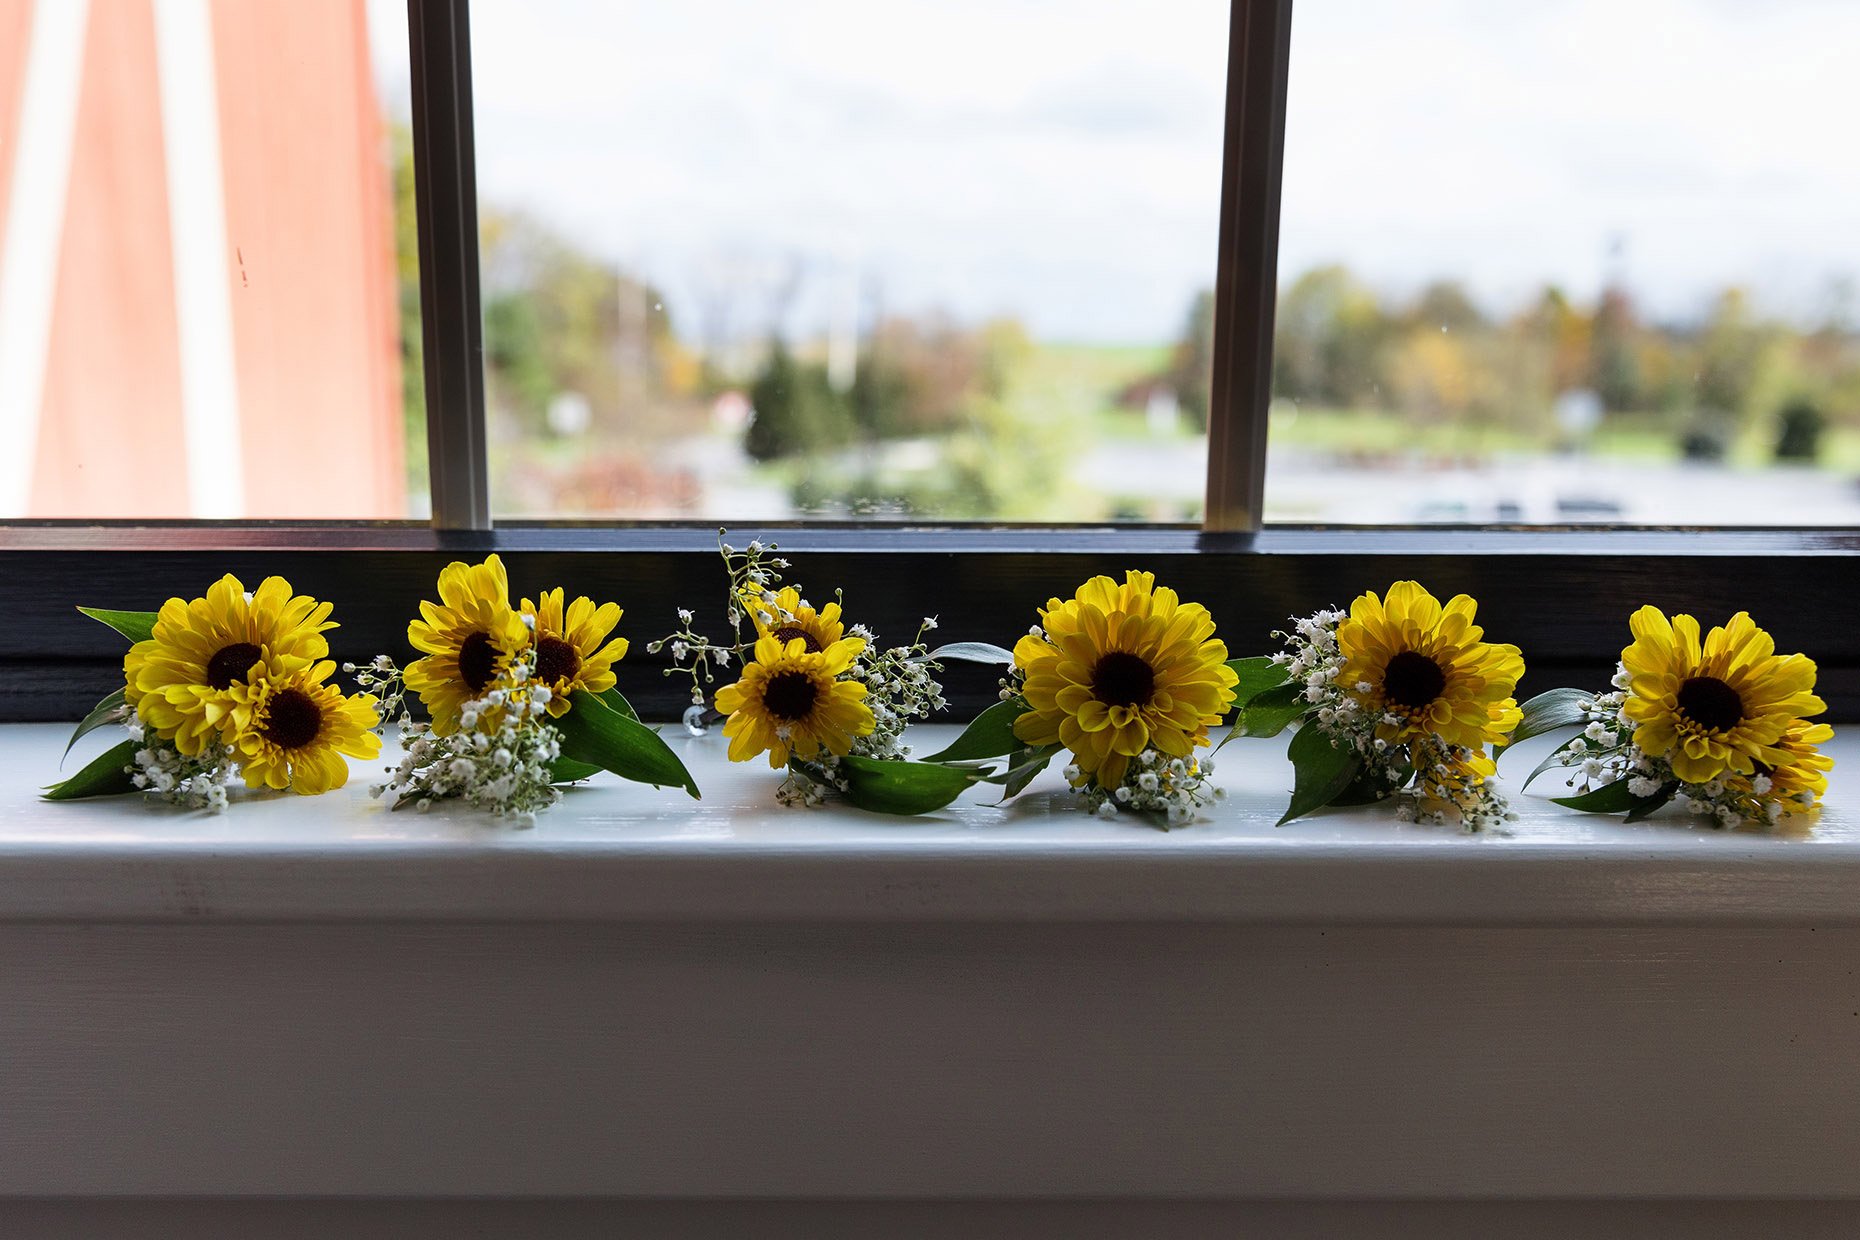 Yellow Flower Boutonnieres lined up on a window sill